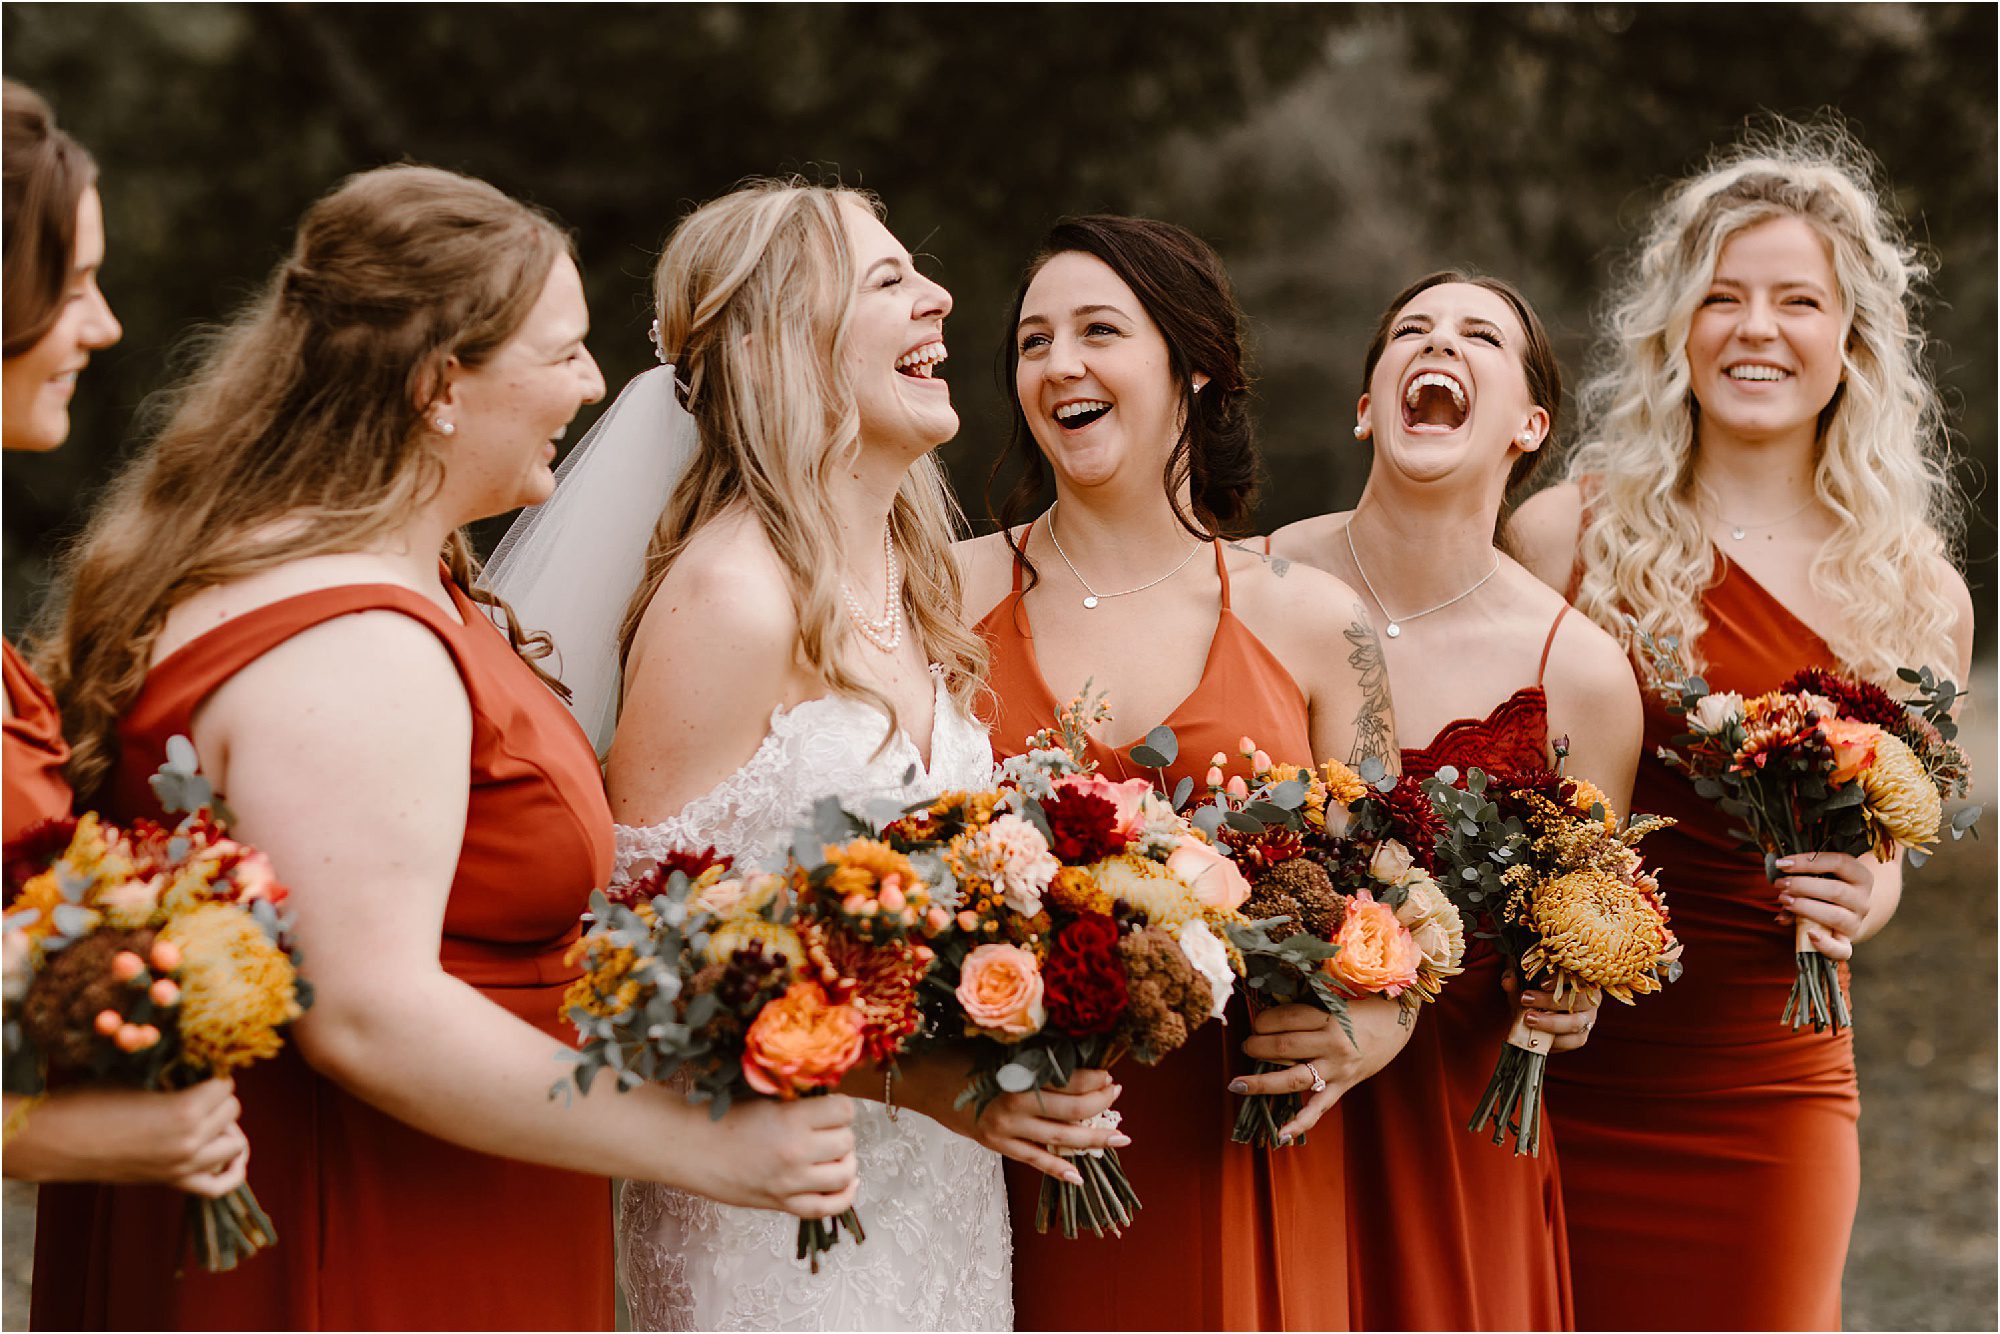 bride laughing with friends at wedding